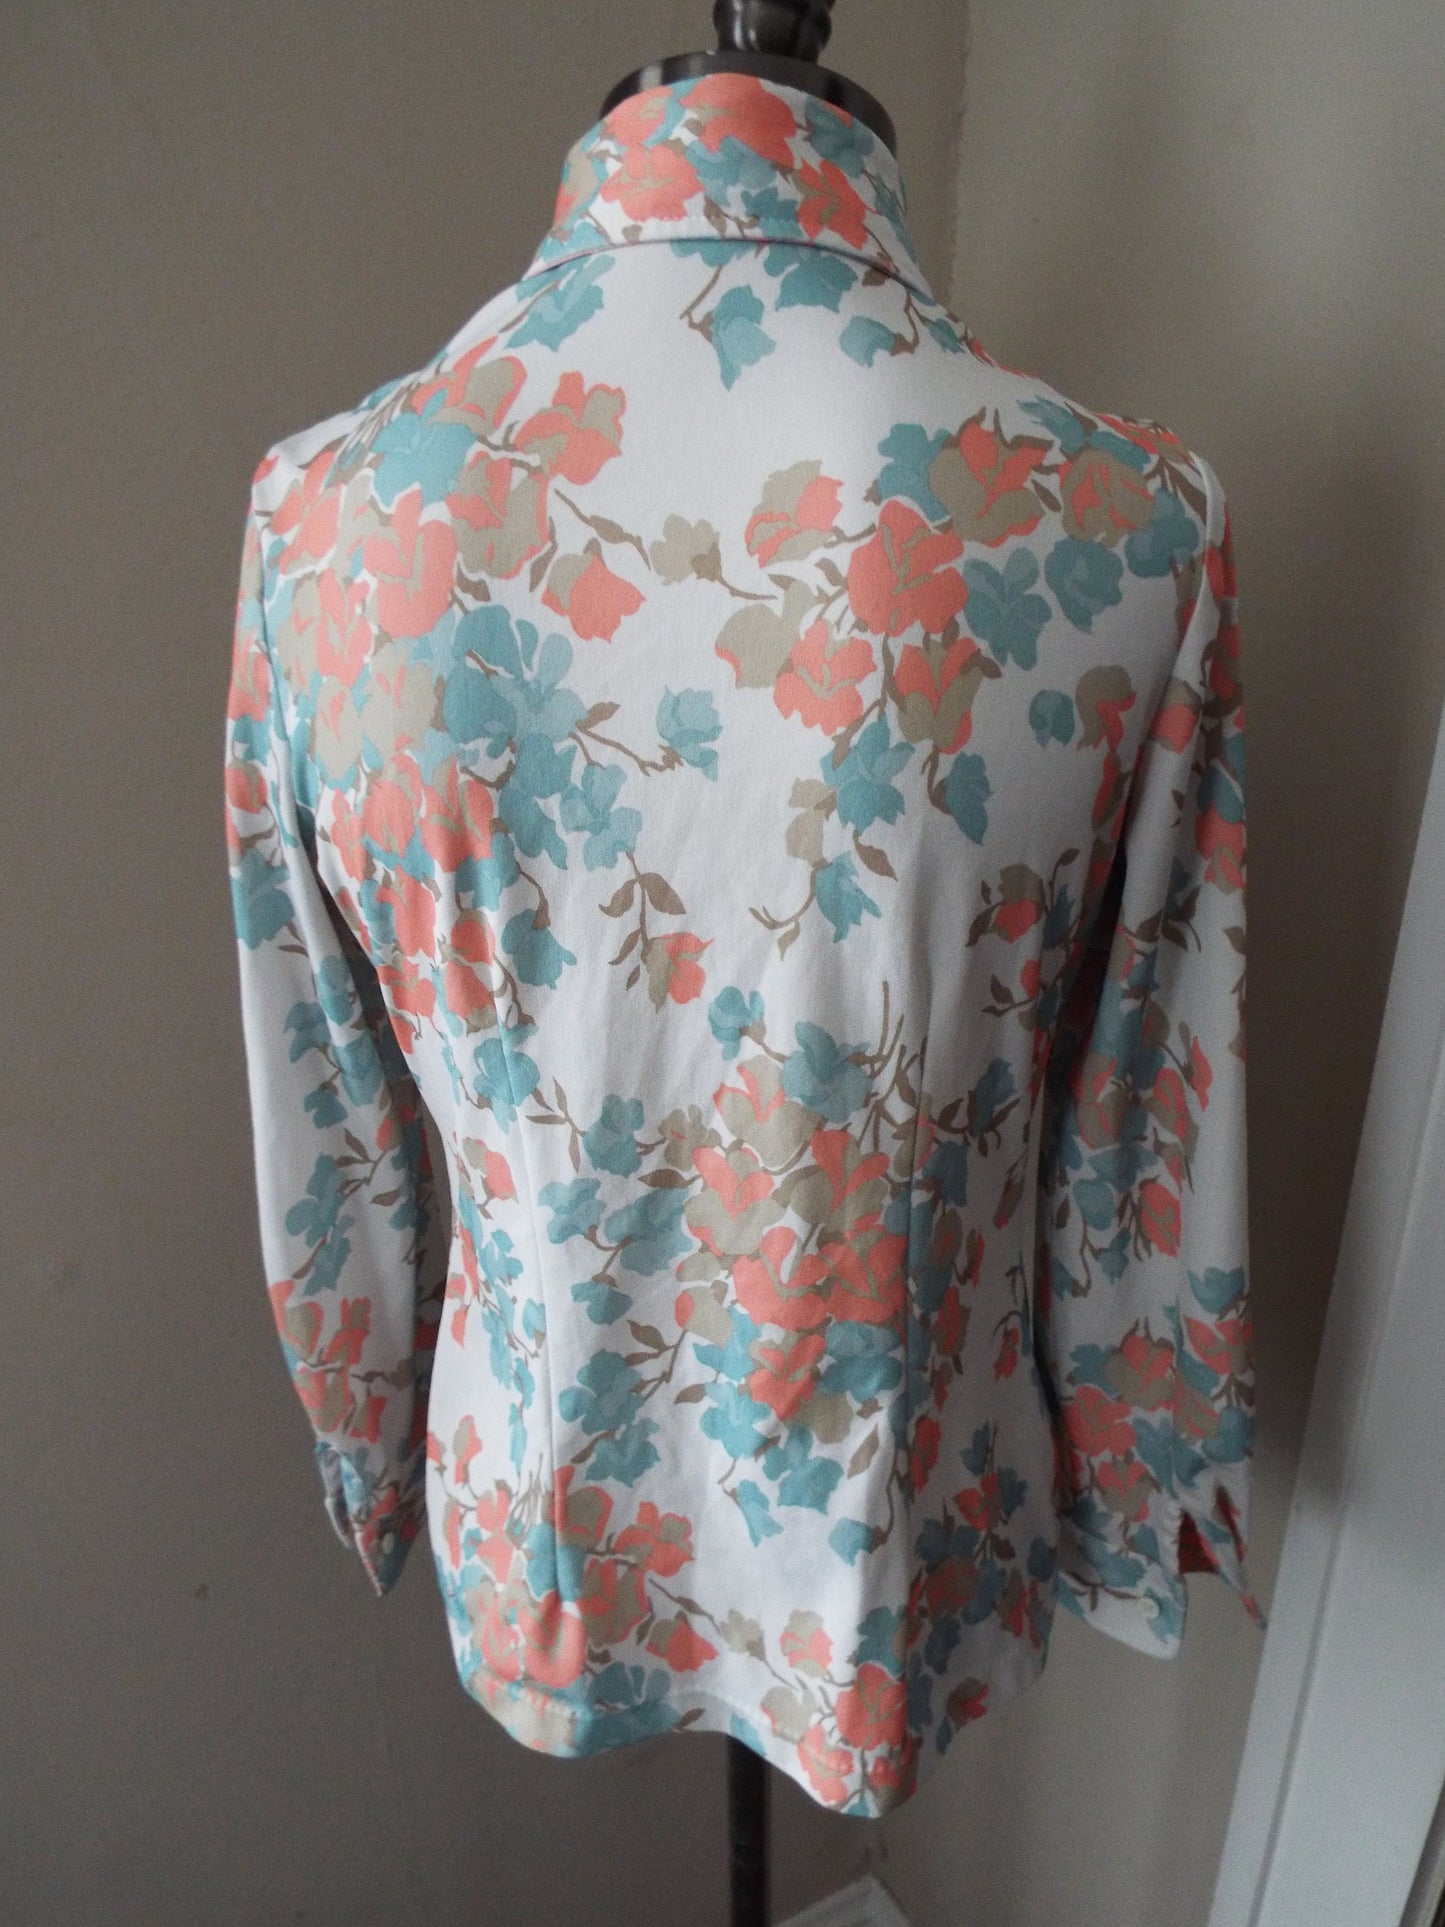 Vintage Long Sleeve Button Down Floral Print Blouse by Sears